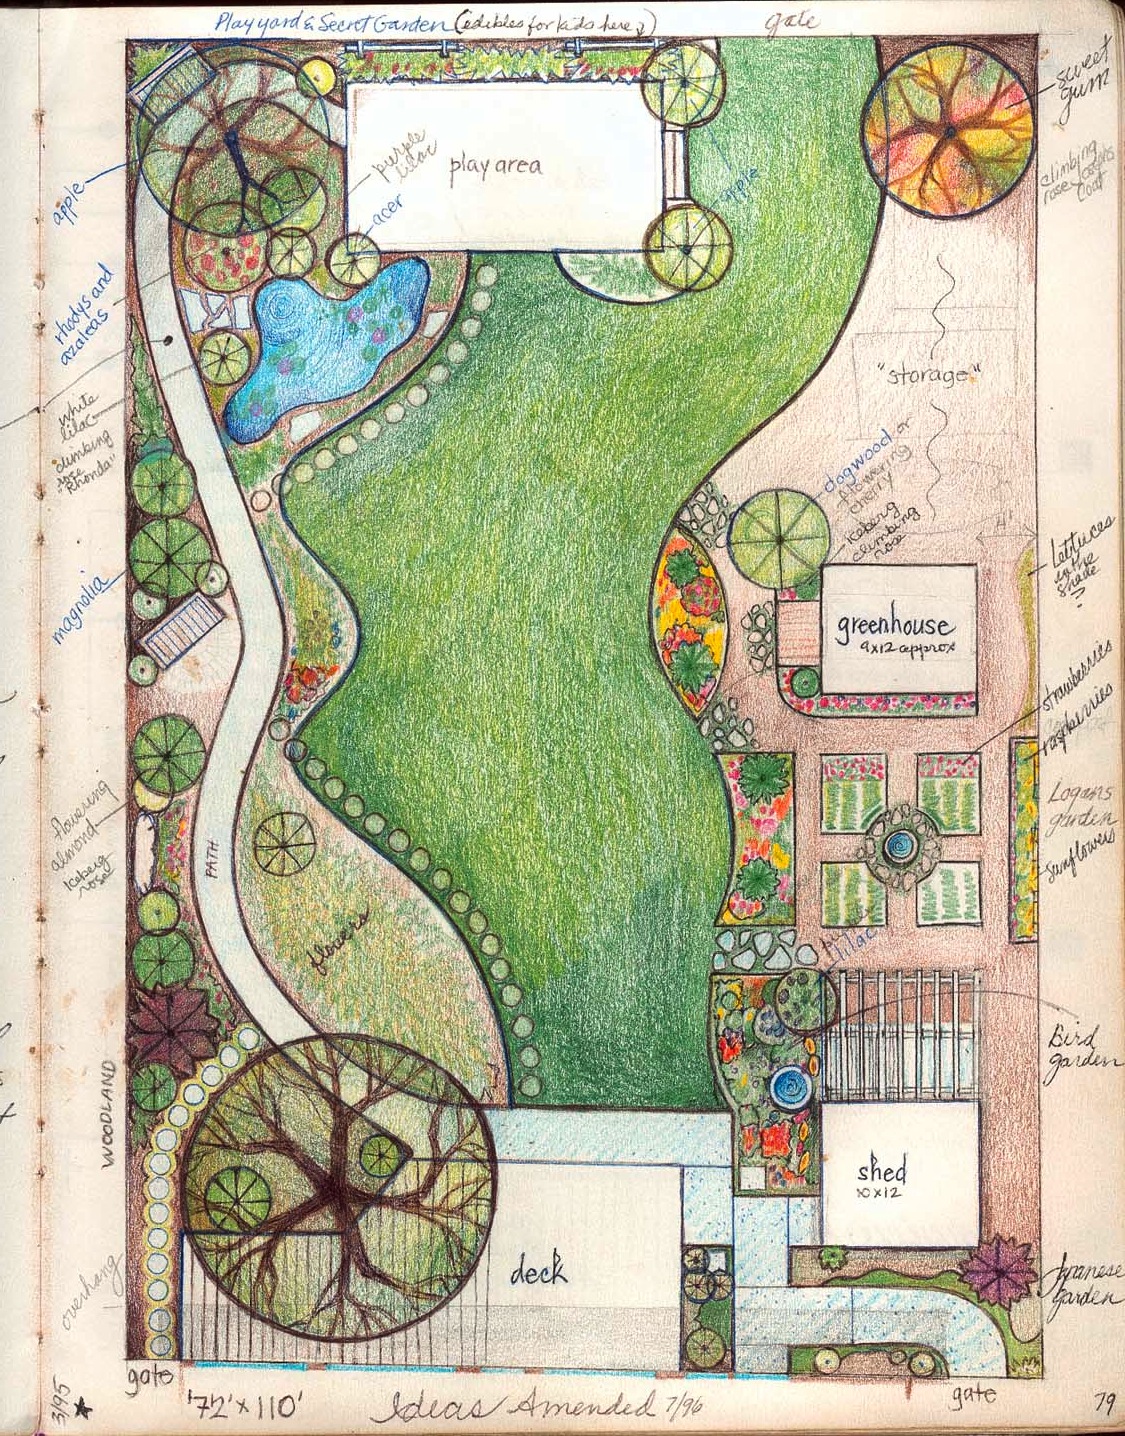 GardenScaping: Plans/Sketches